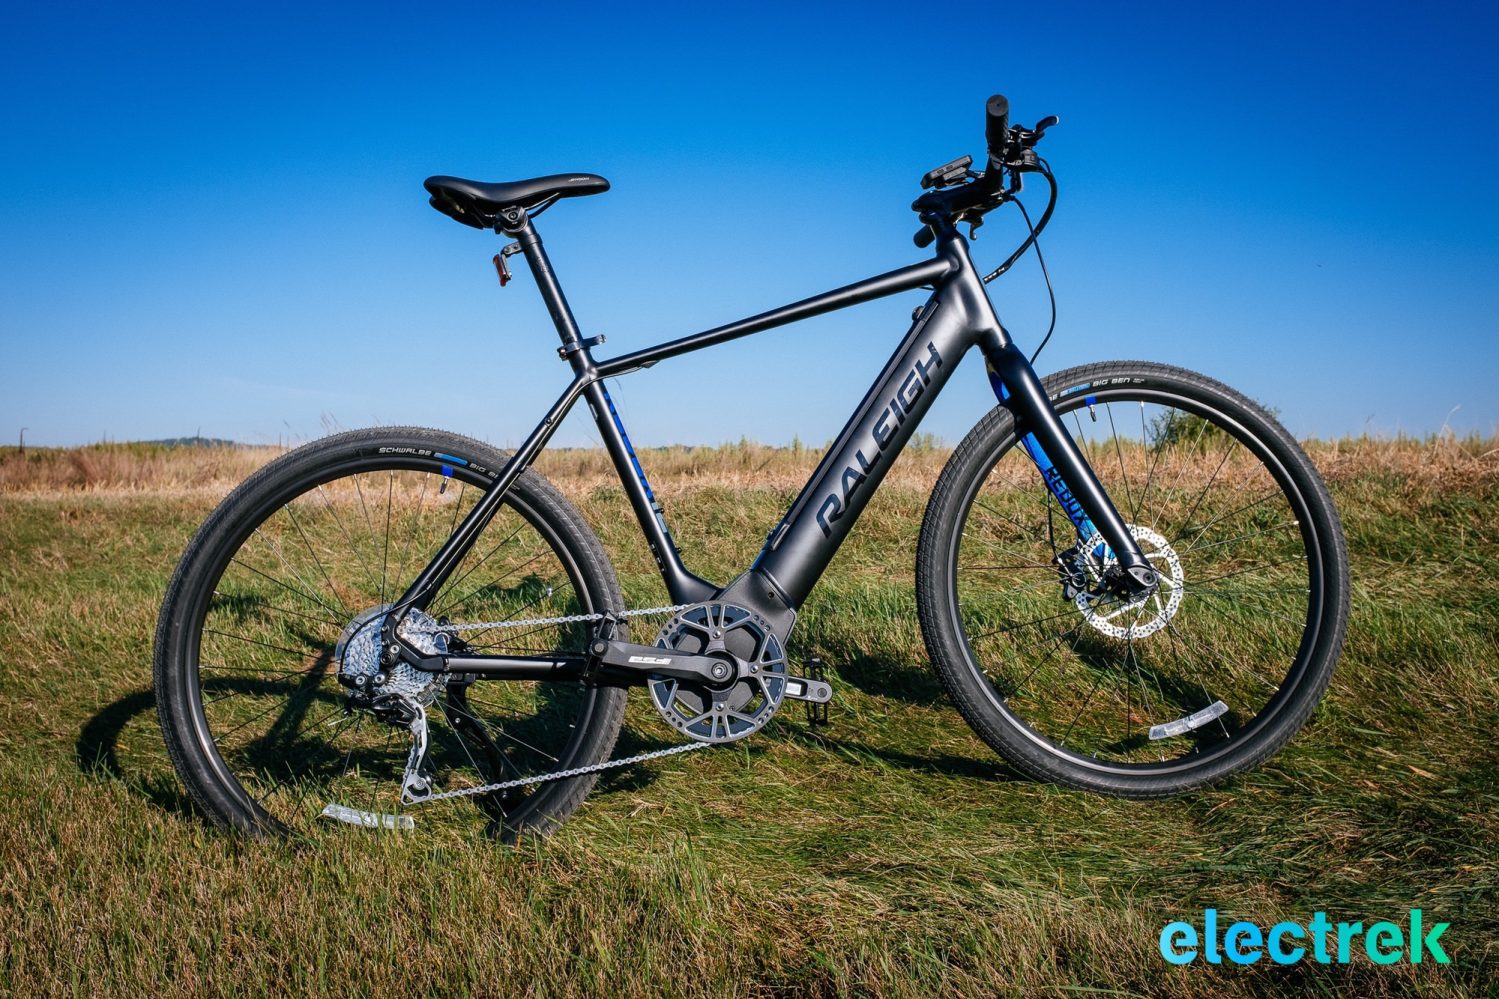 The Electrek Review: Raleigh Redux IE the new commuter benchmark?